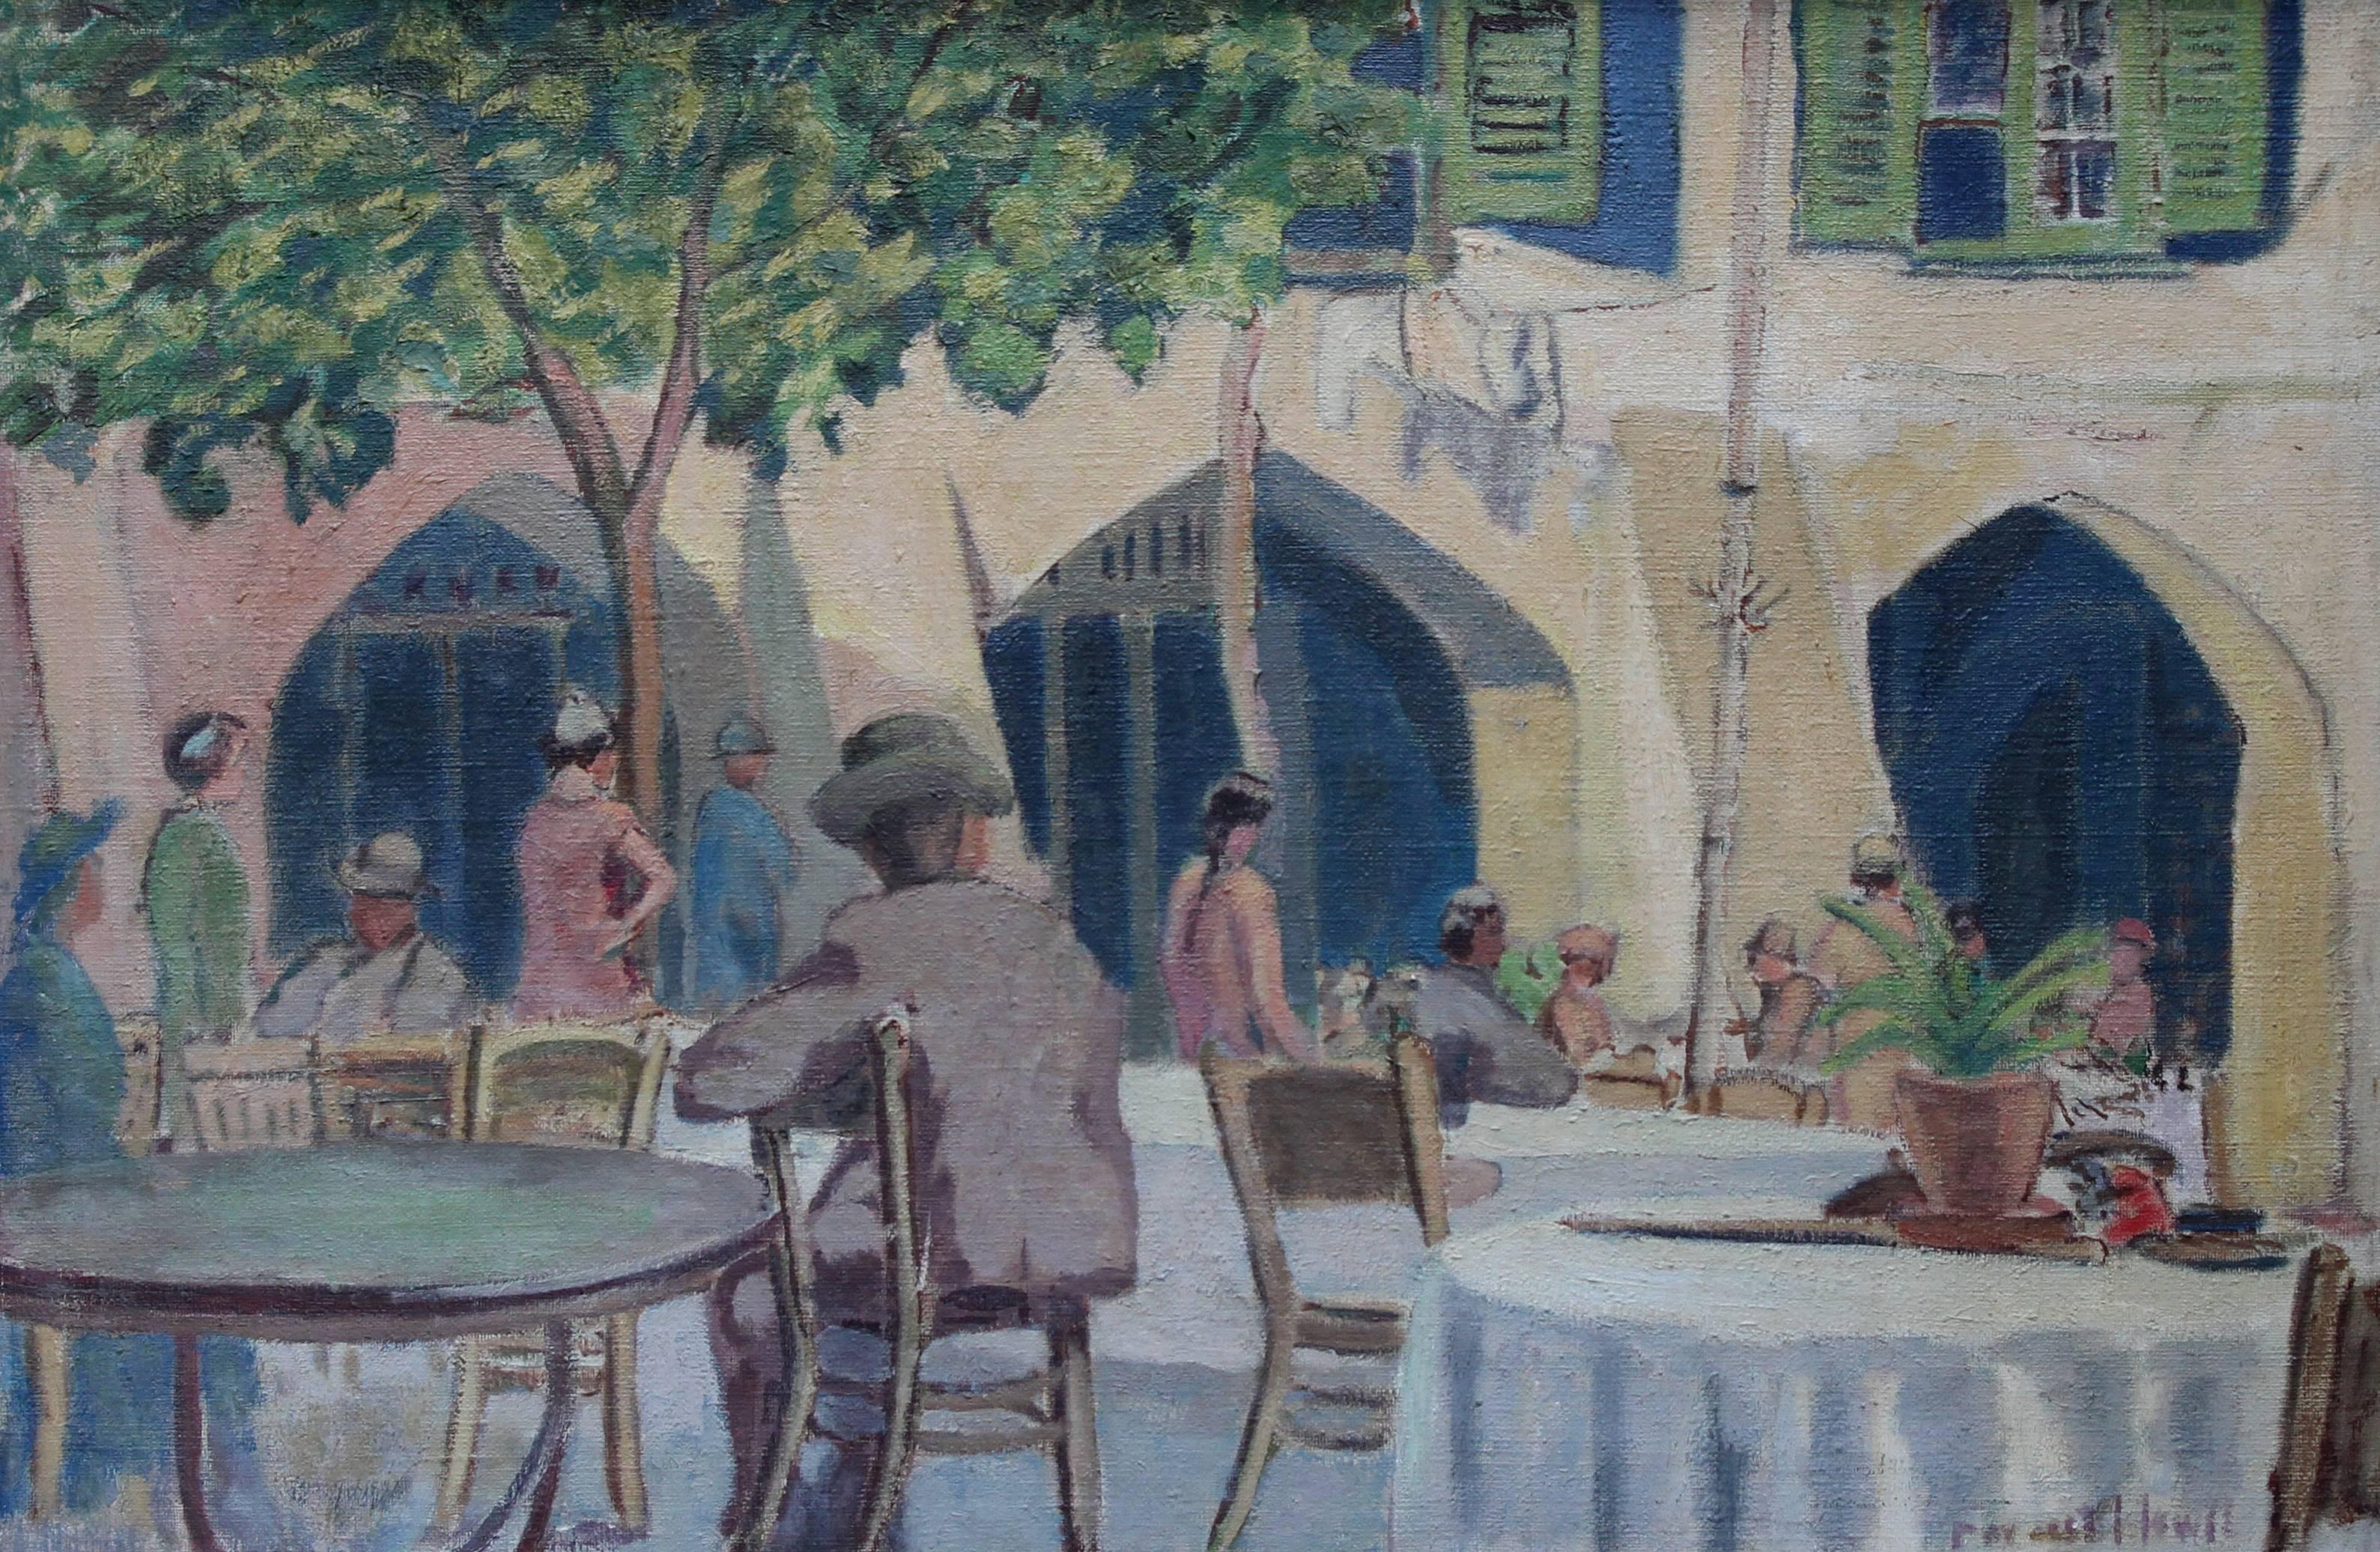 Cafe Porto Fino Italy - British Post Impressionist oil painting Italian Riviera - Painting by Forrest Hewit